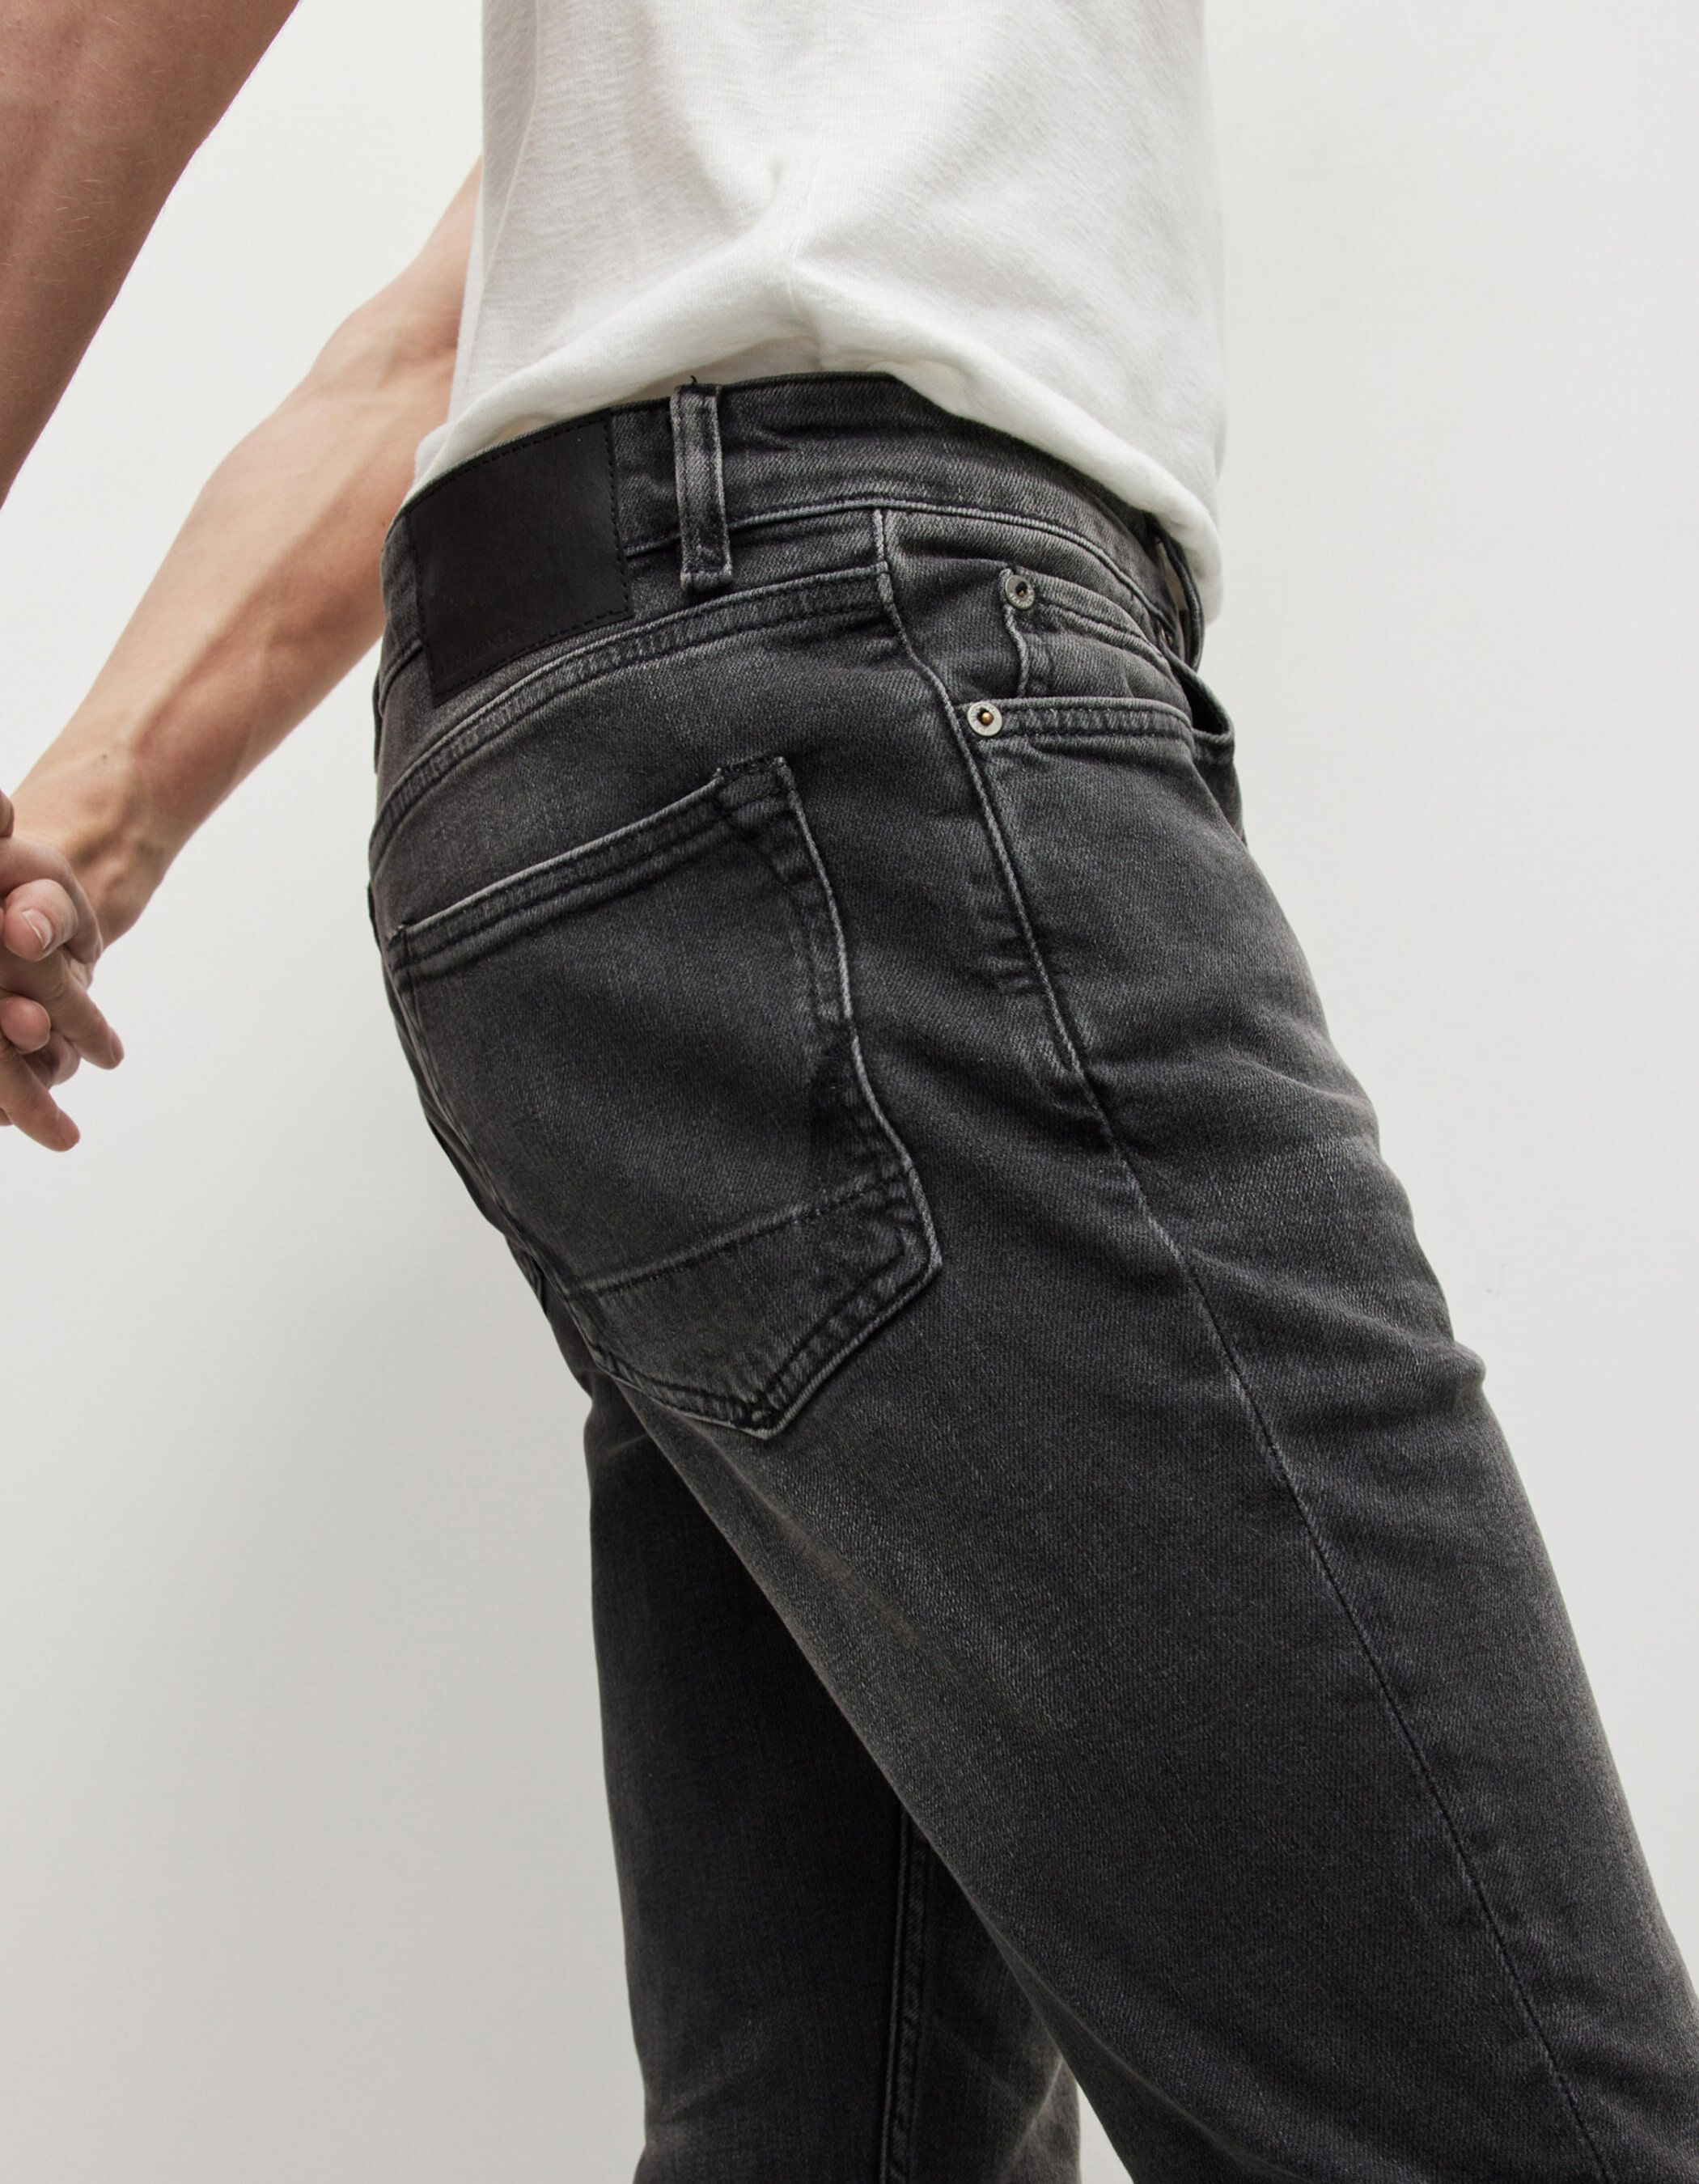 The Defining Features of Benzak Denim Developers Jeans | by Thomas Stege  Bojer | Medium